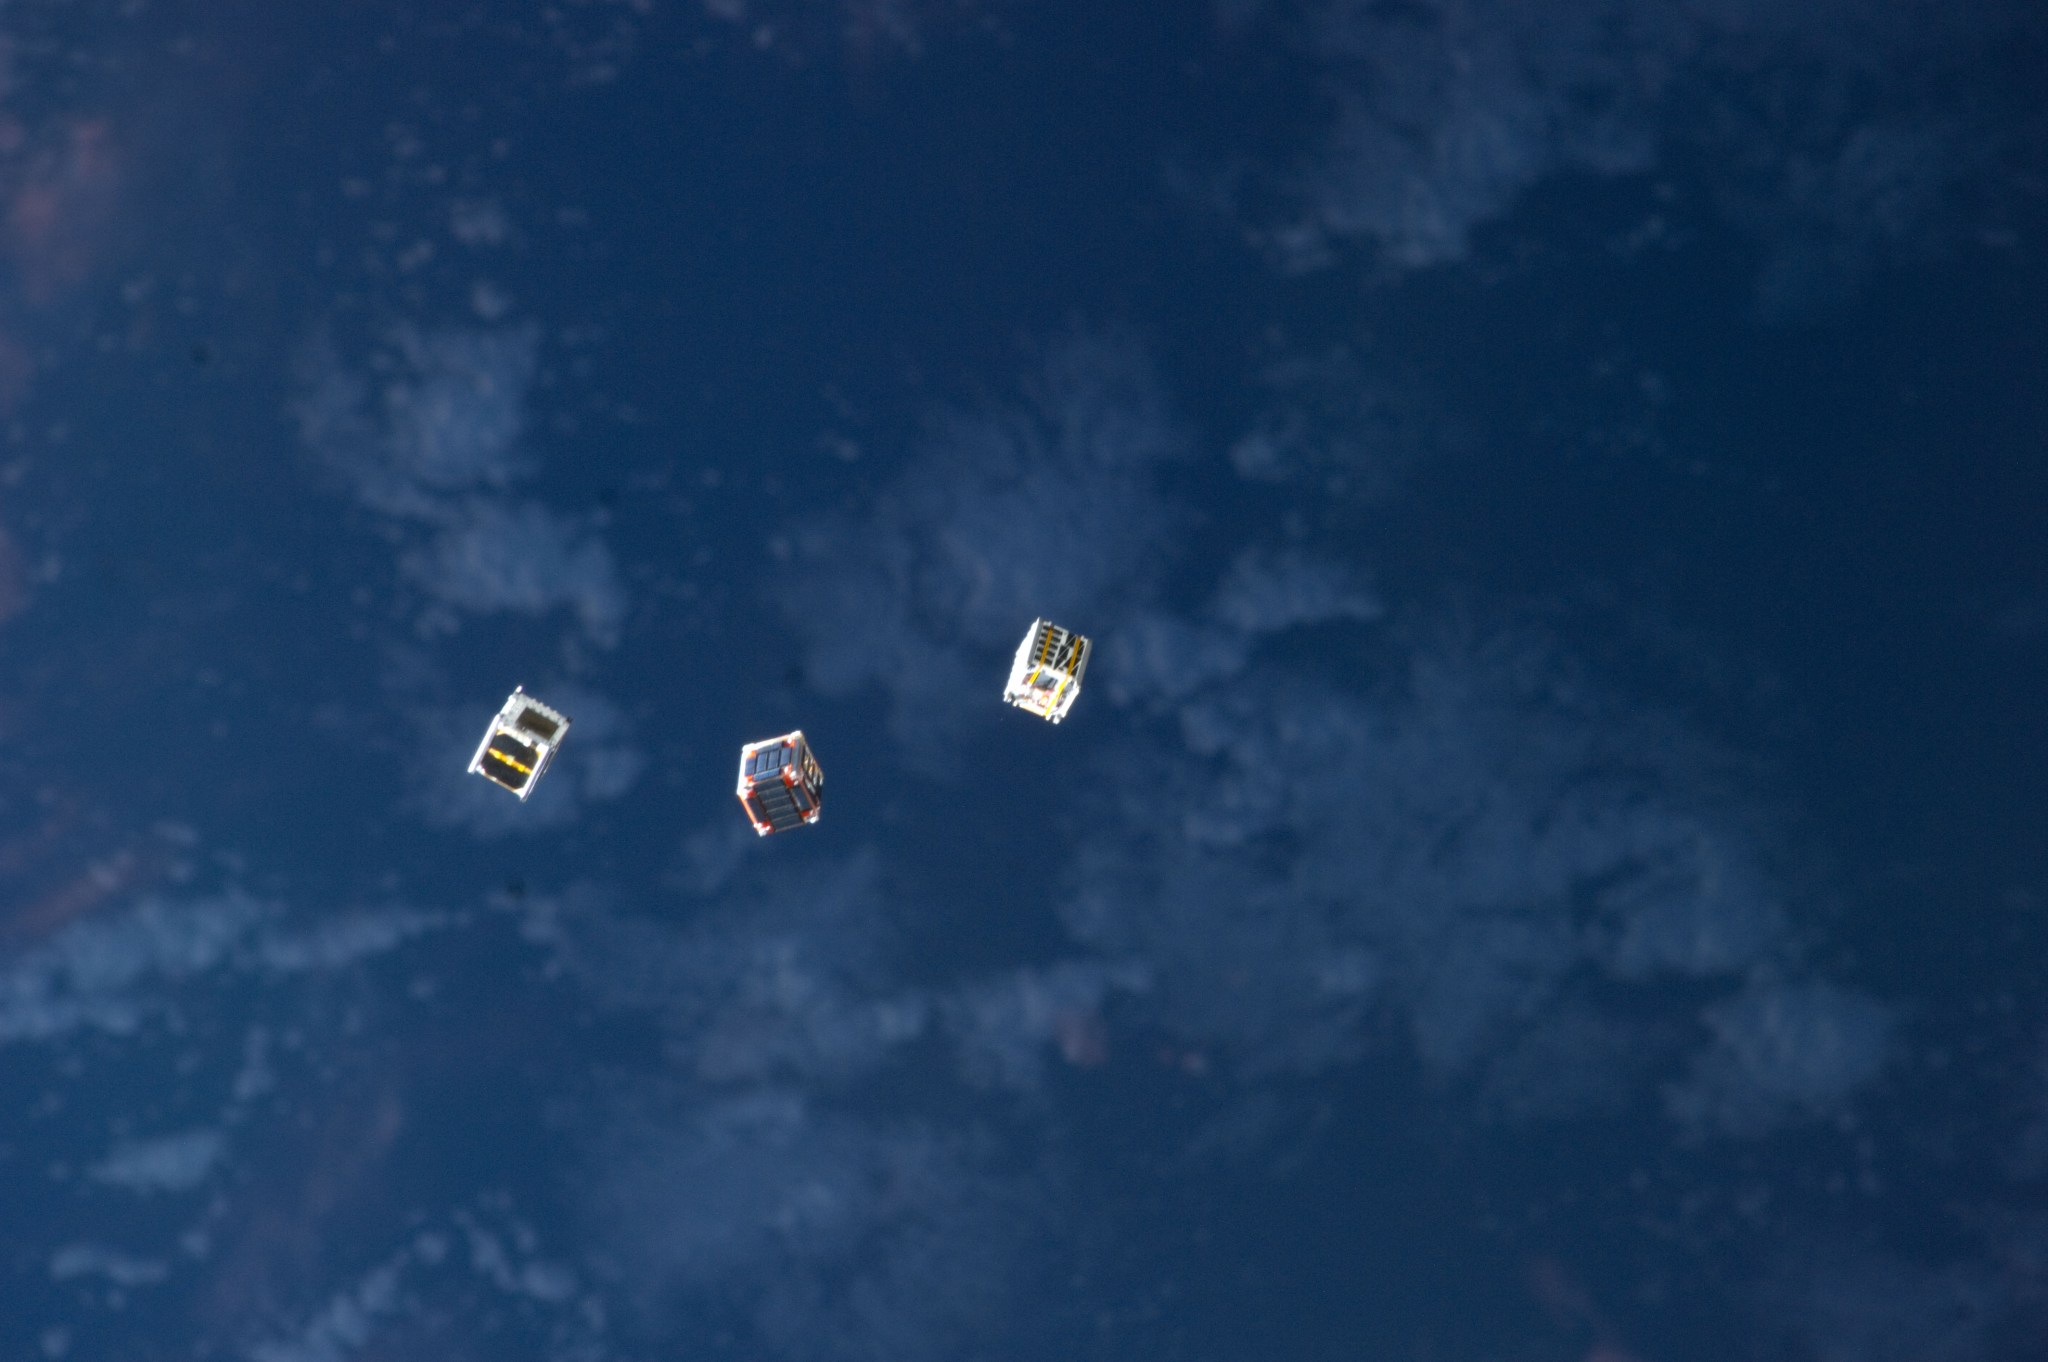 Three cubesats shown looking down from the international space station against a far off background of Earth's surface.